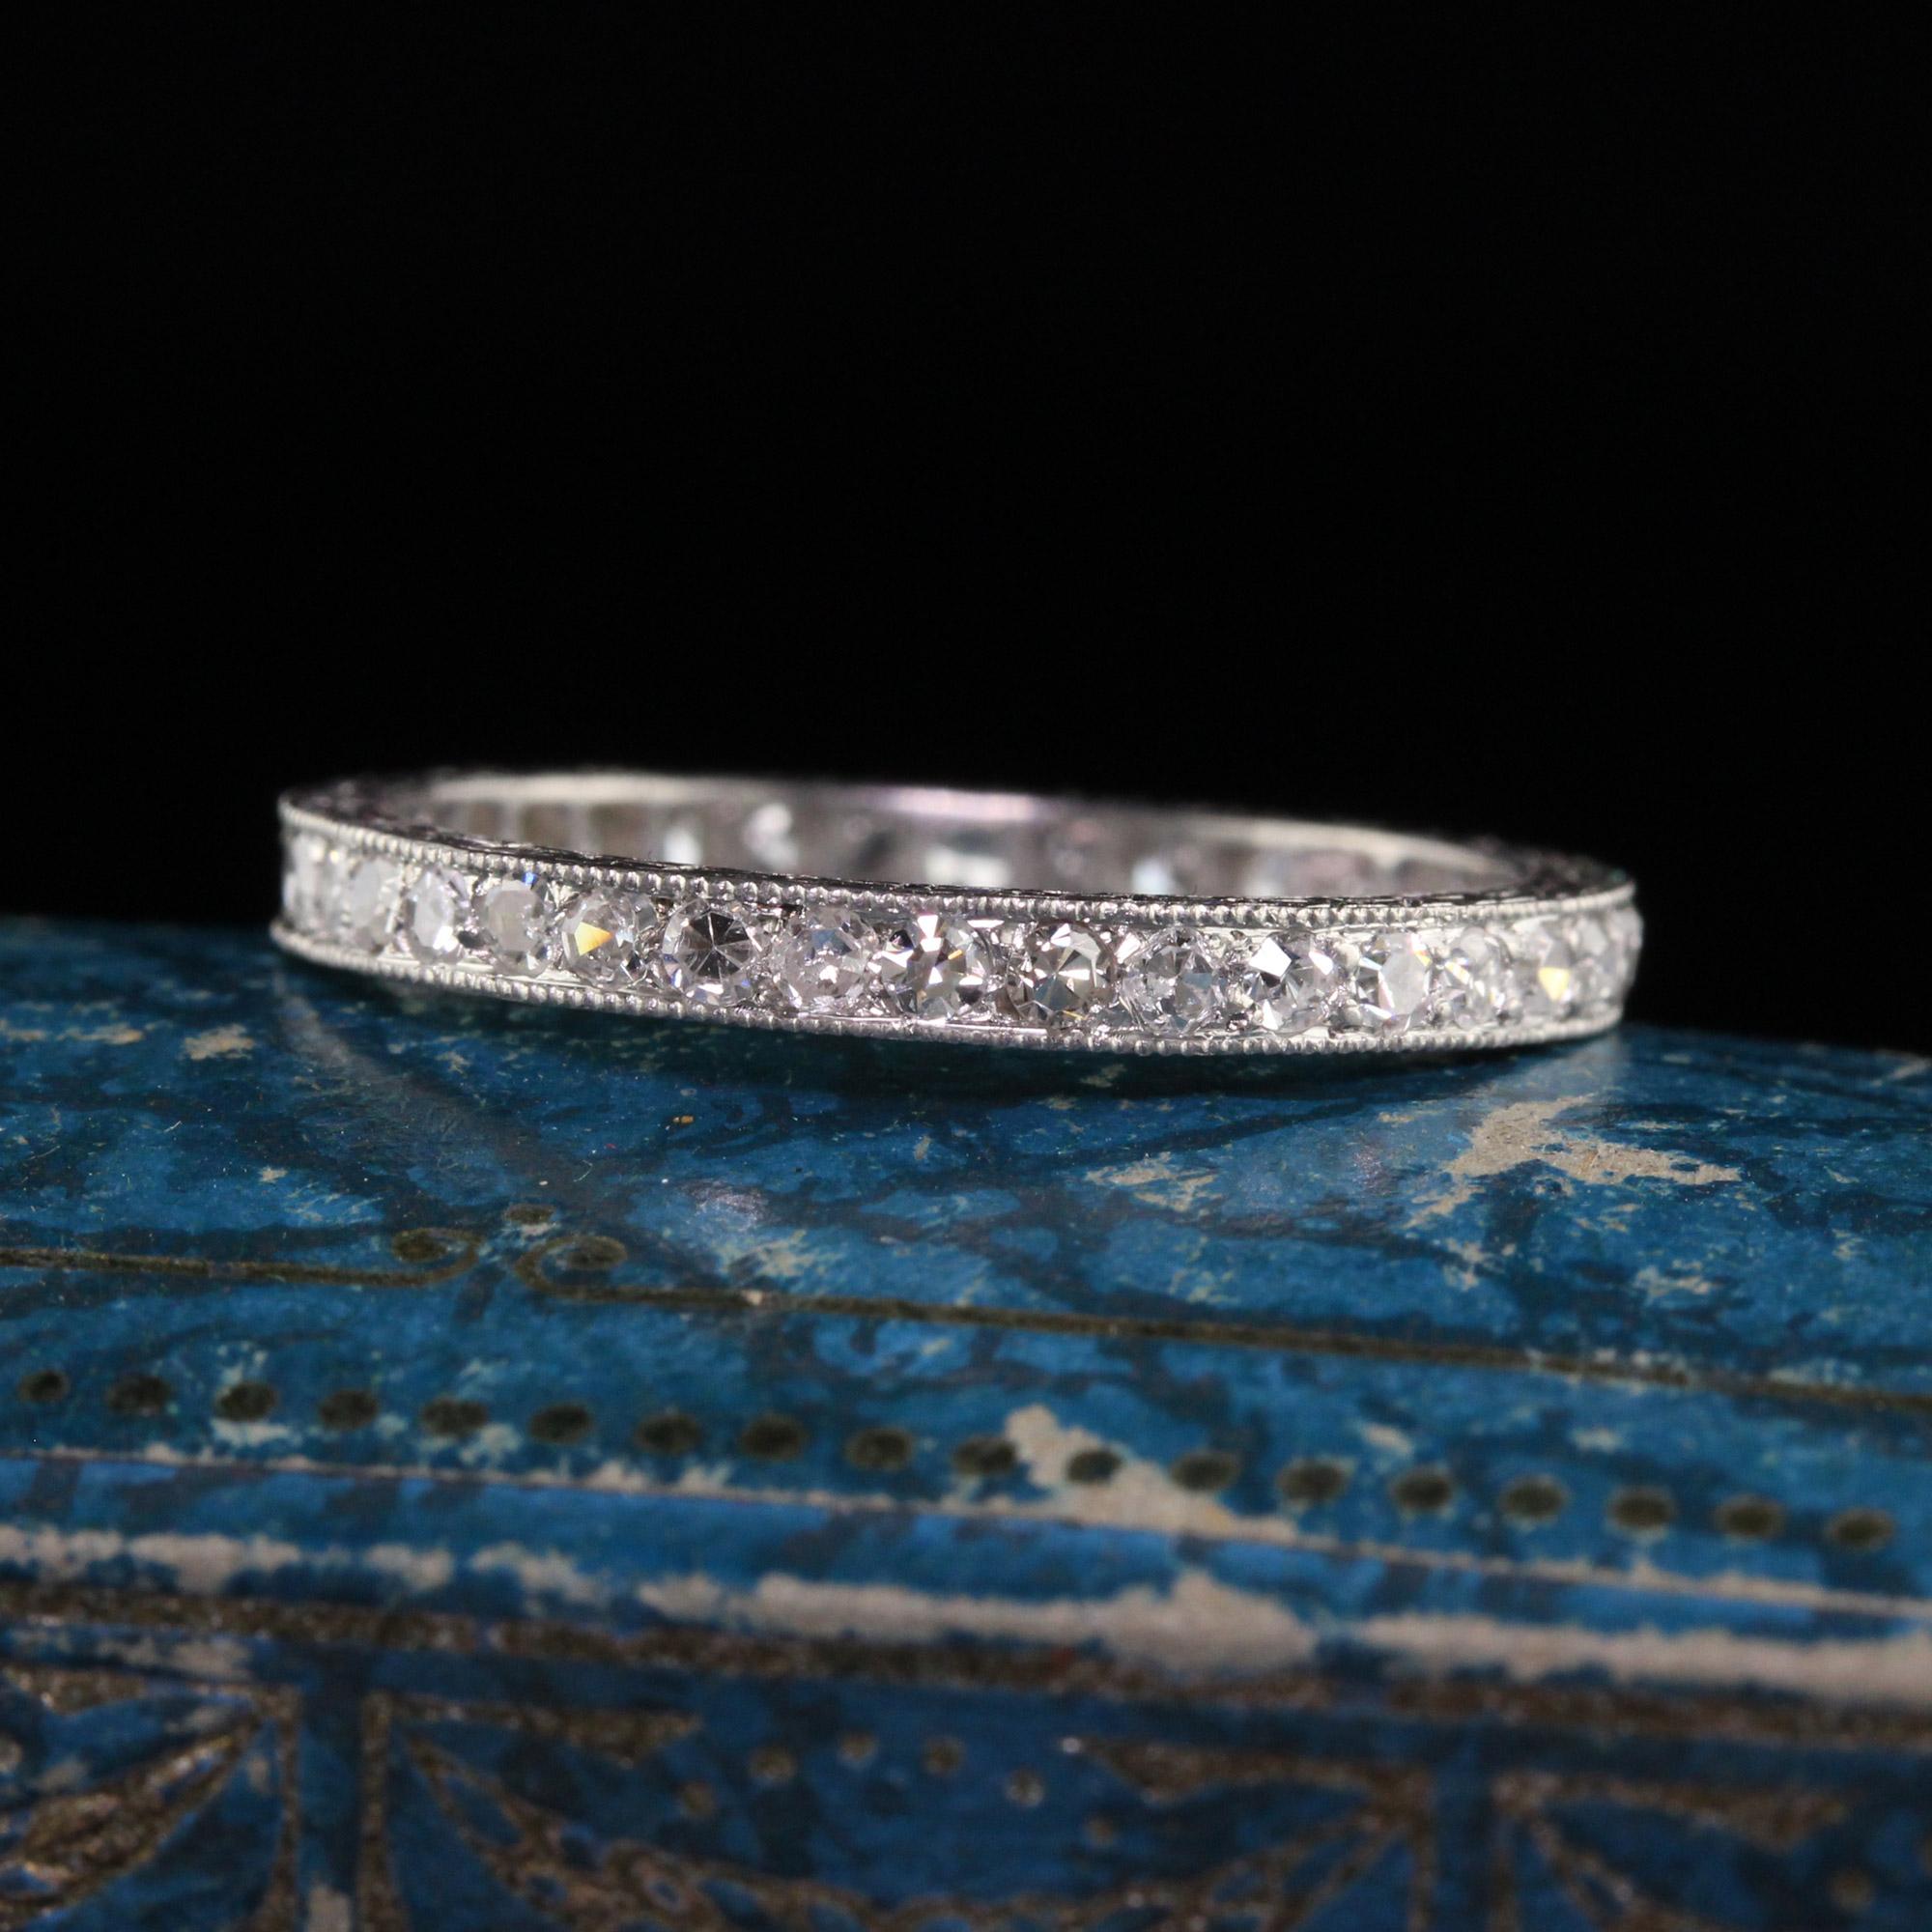 Beautiful Antique Art Deco Platinum Single Cut Diamond Engraved Wedding Band - Size 6 1/4. This gorgeous wedding band is crafted in platinum. The ring has gorgeous single cut diamonds going around the entire band and the sides of the ring are deeply